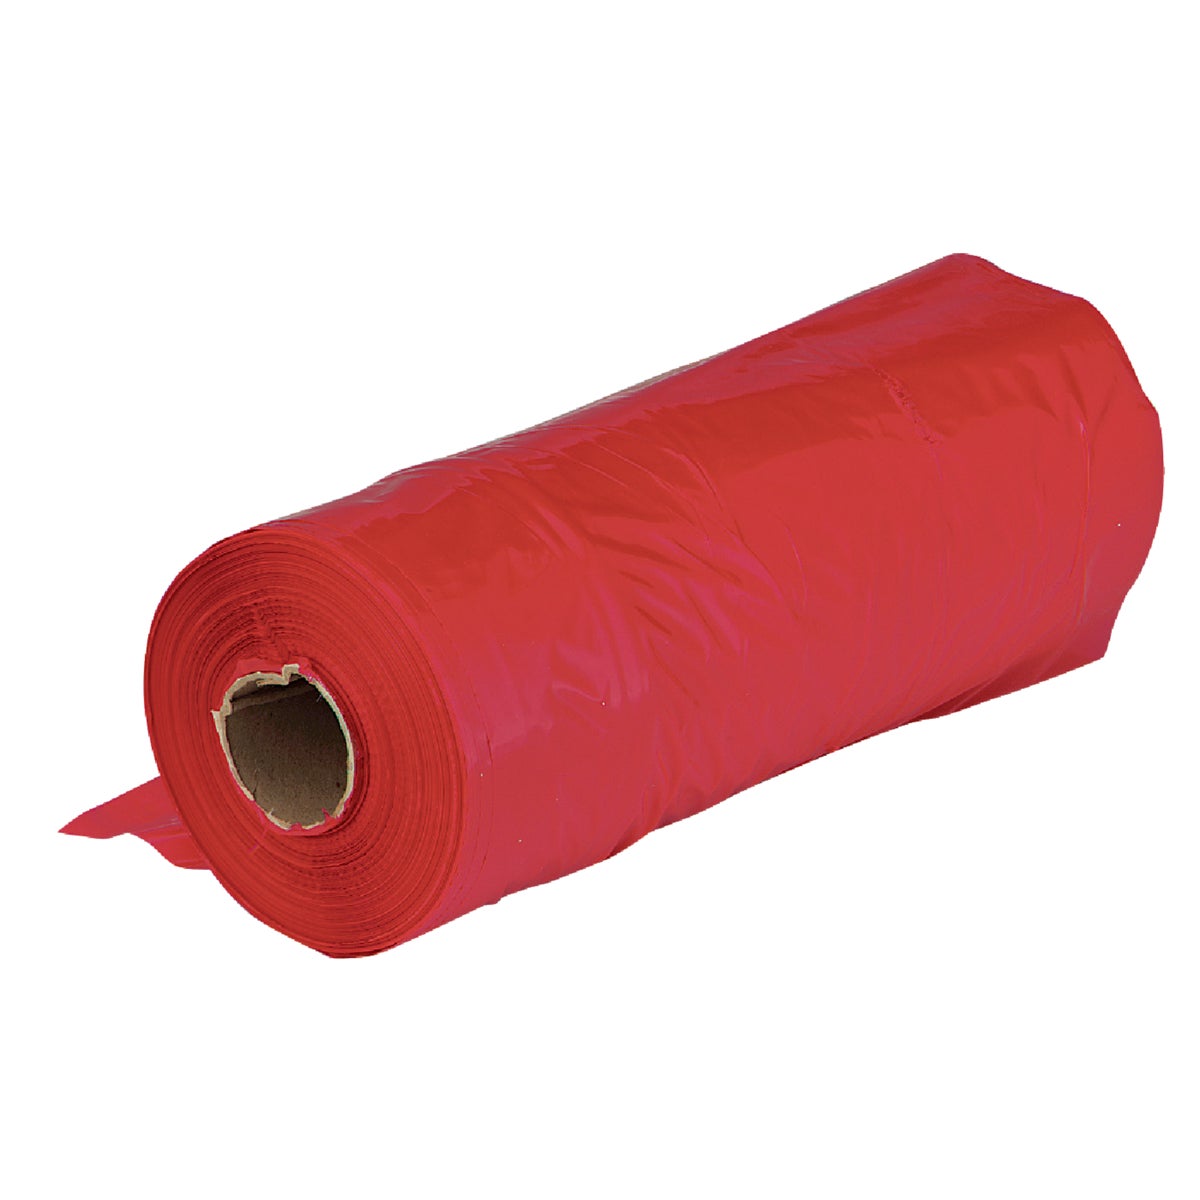 Item 107958, 18" x 18" red polyethylene film. Used to protect a customer's load.